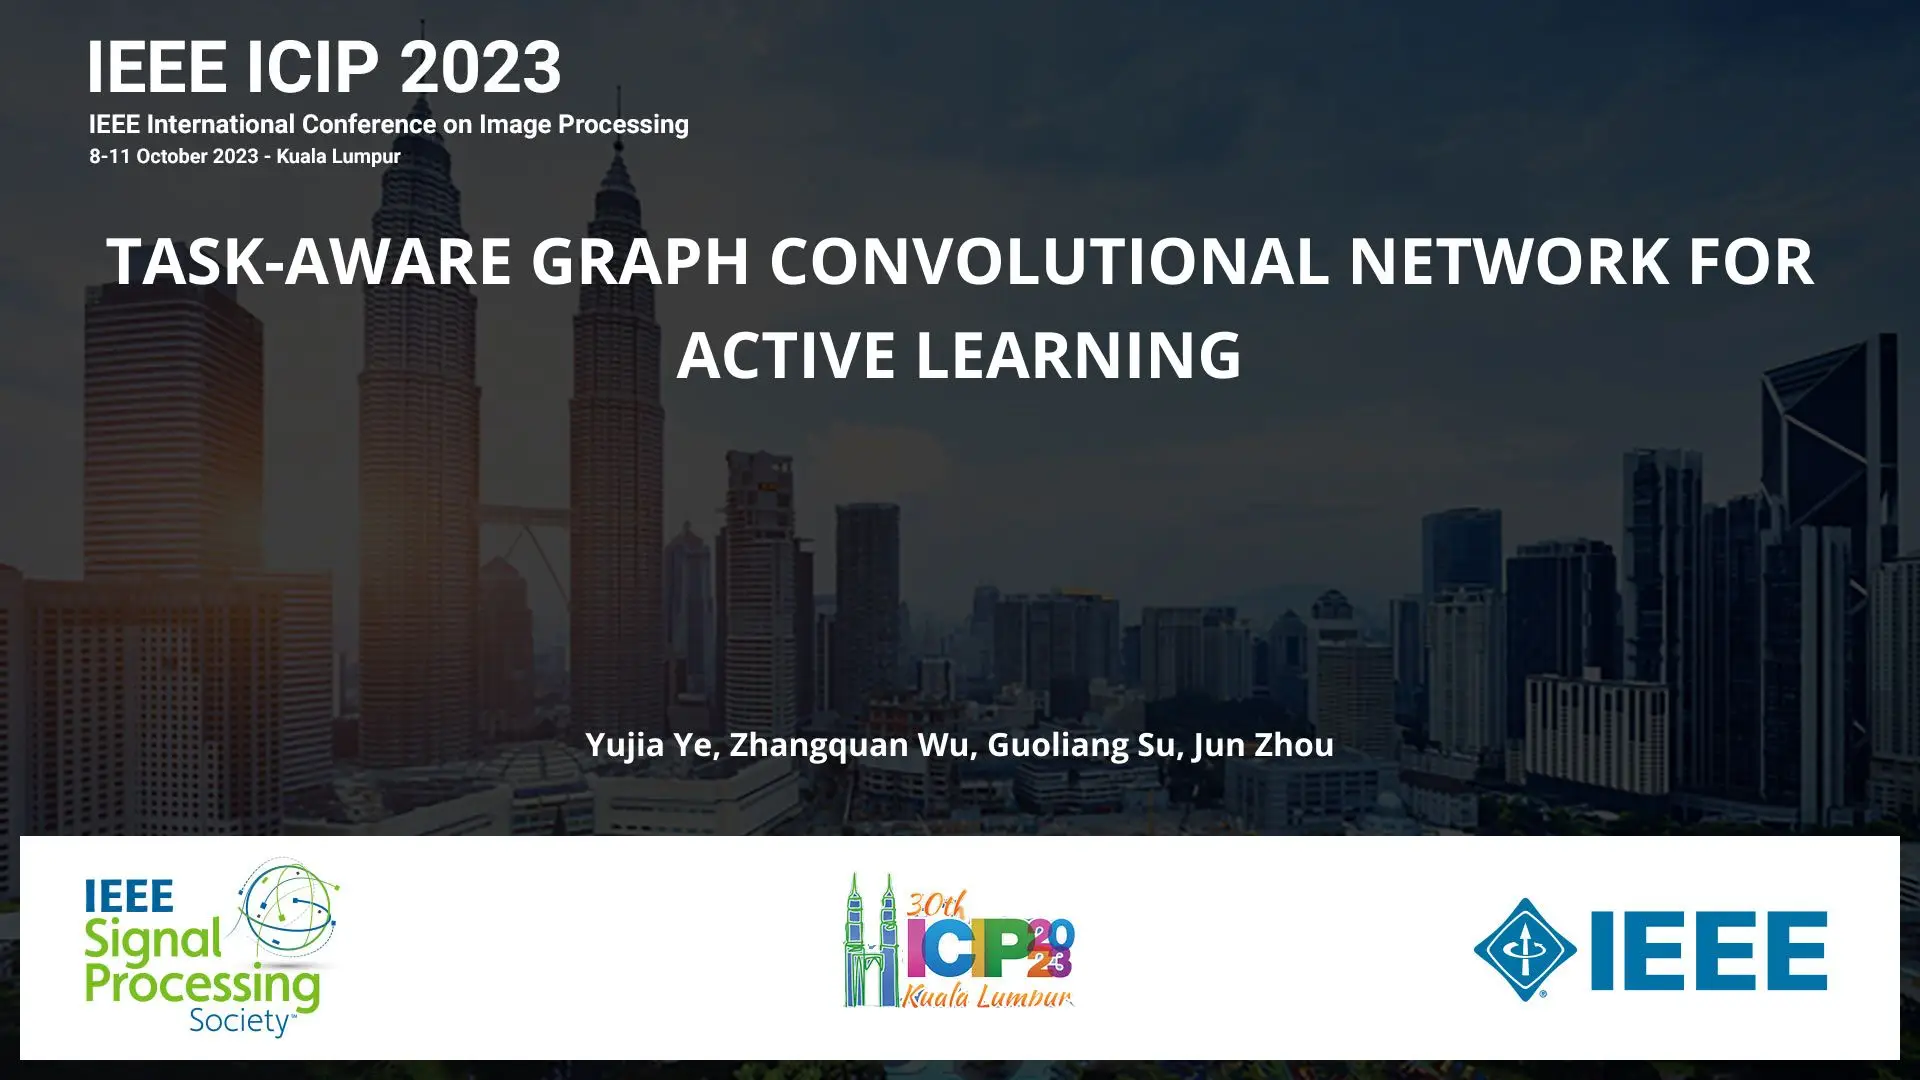 TASK-AWARE GRAPH CONVOLUTIONAL NETWORK FOR ACTIVE LEARNING